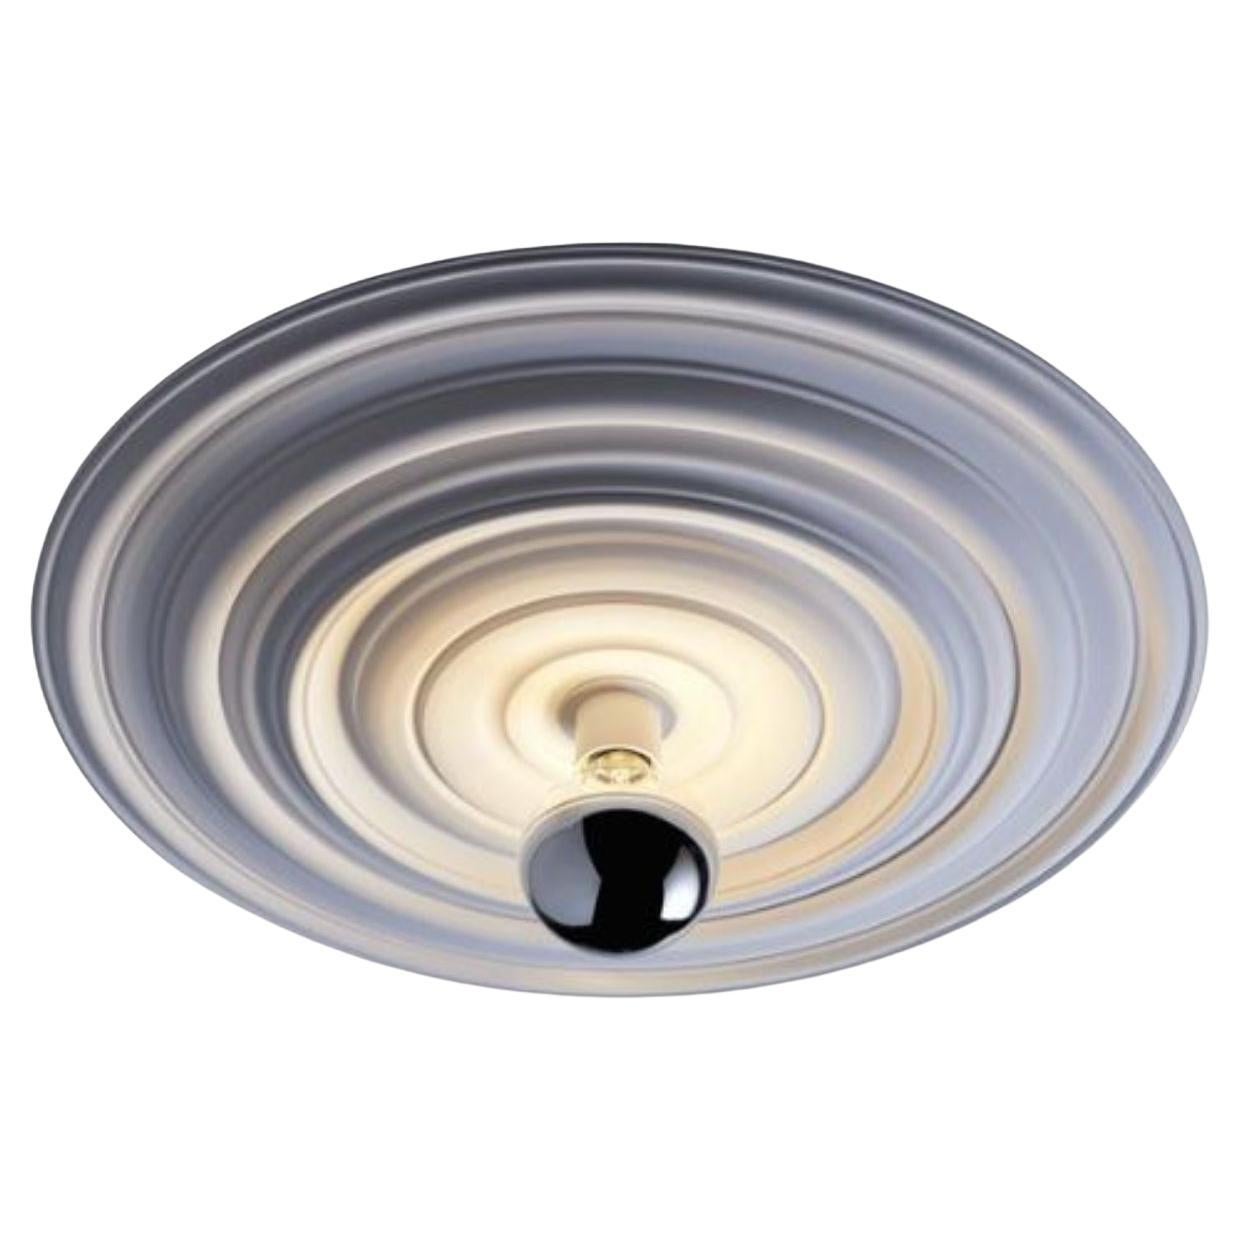 Large Odeon Ceiling Light by Radar